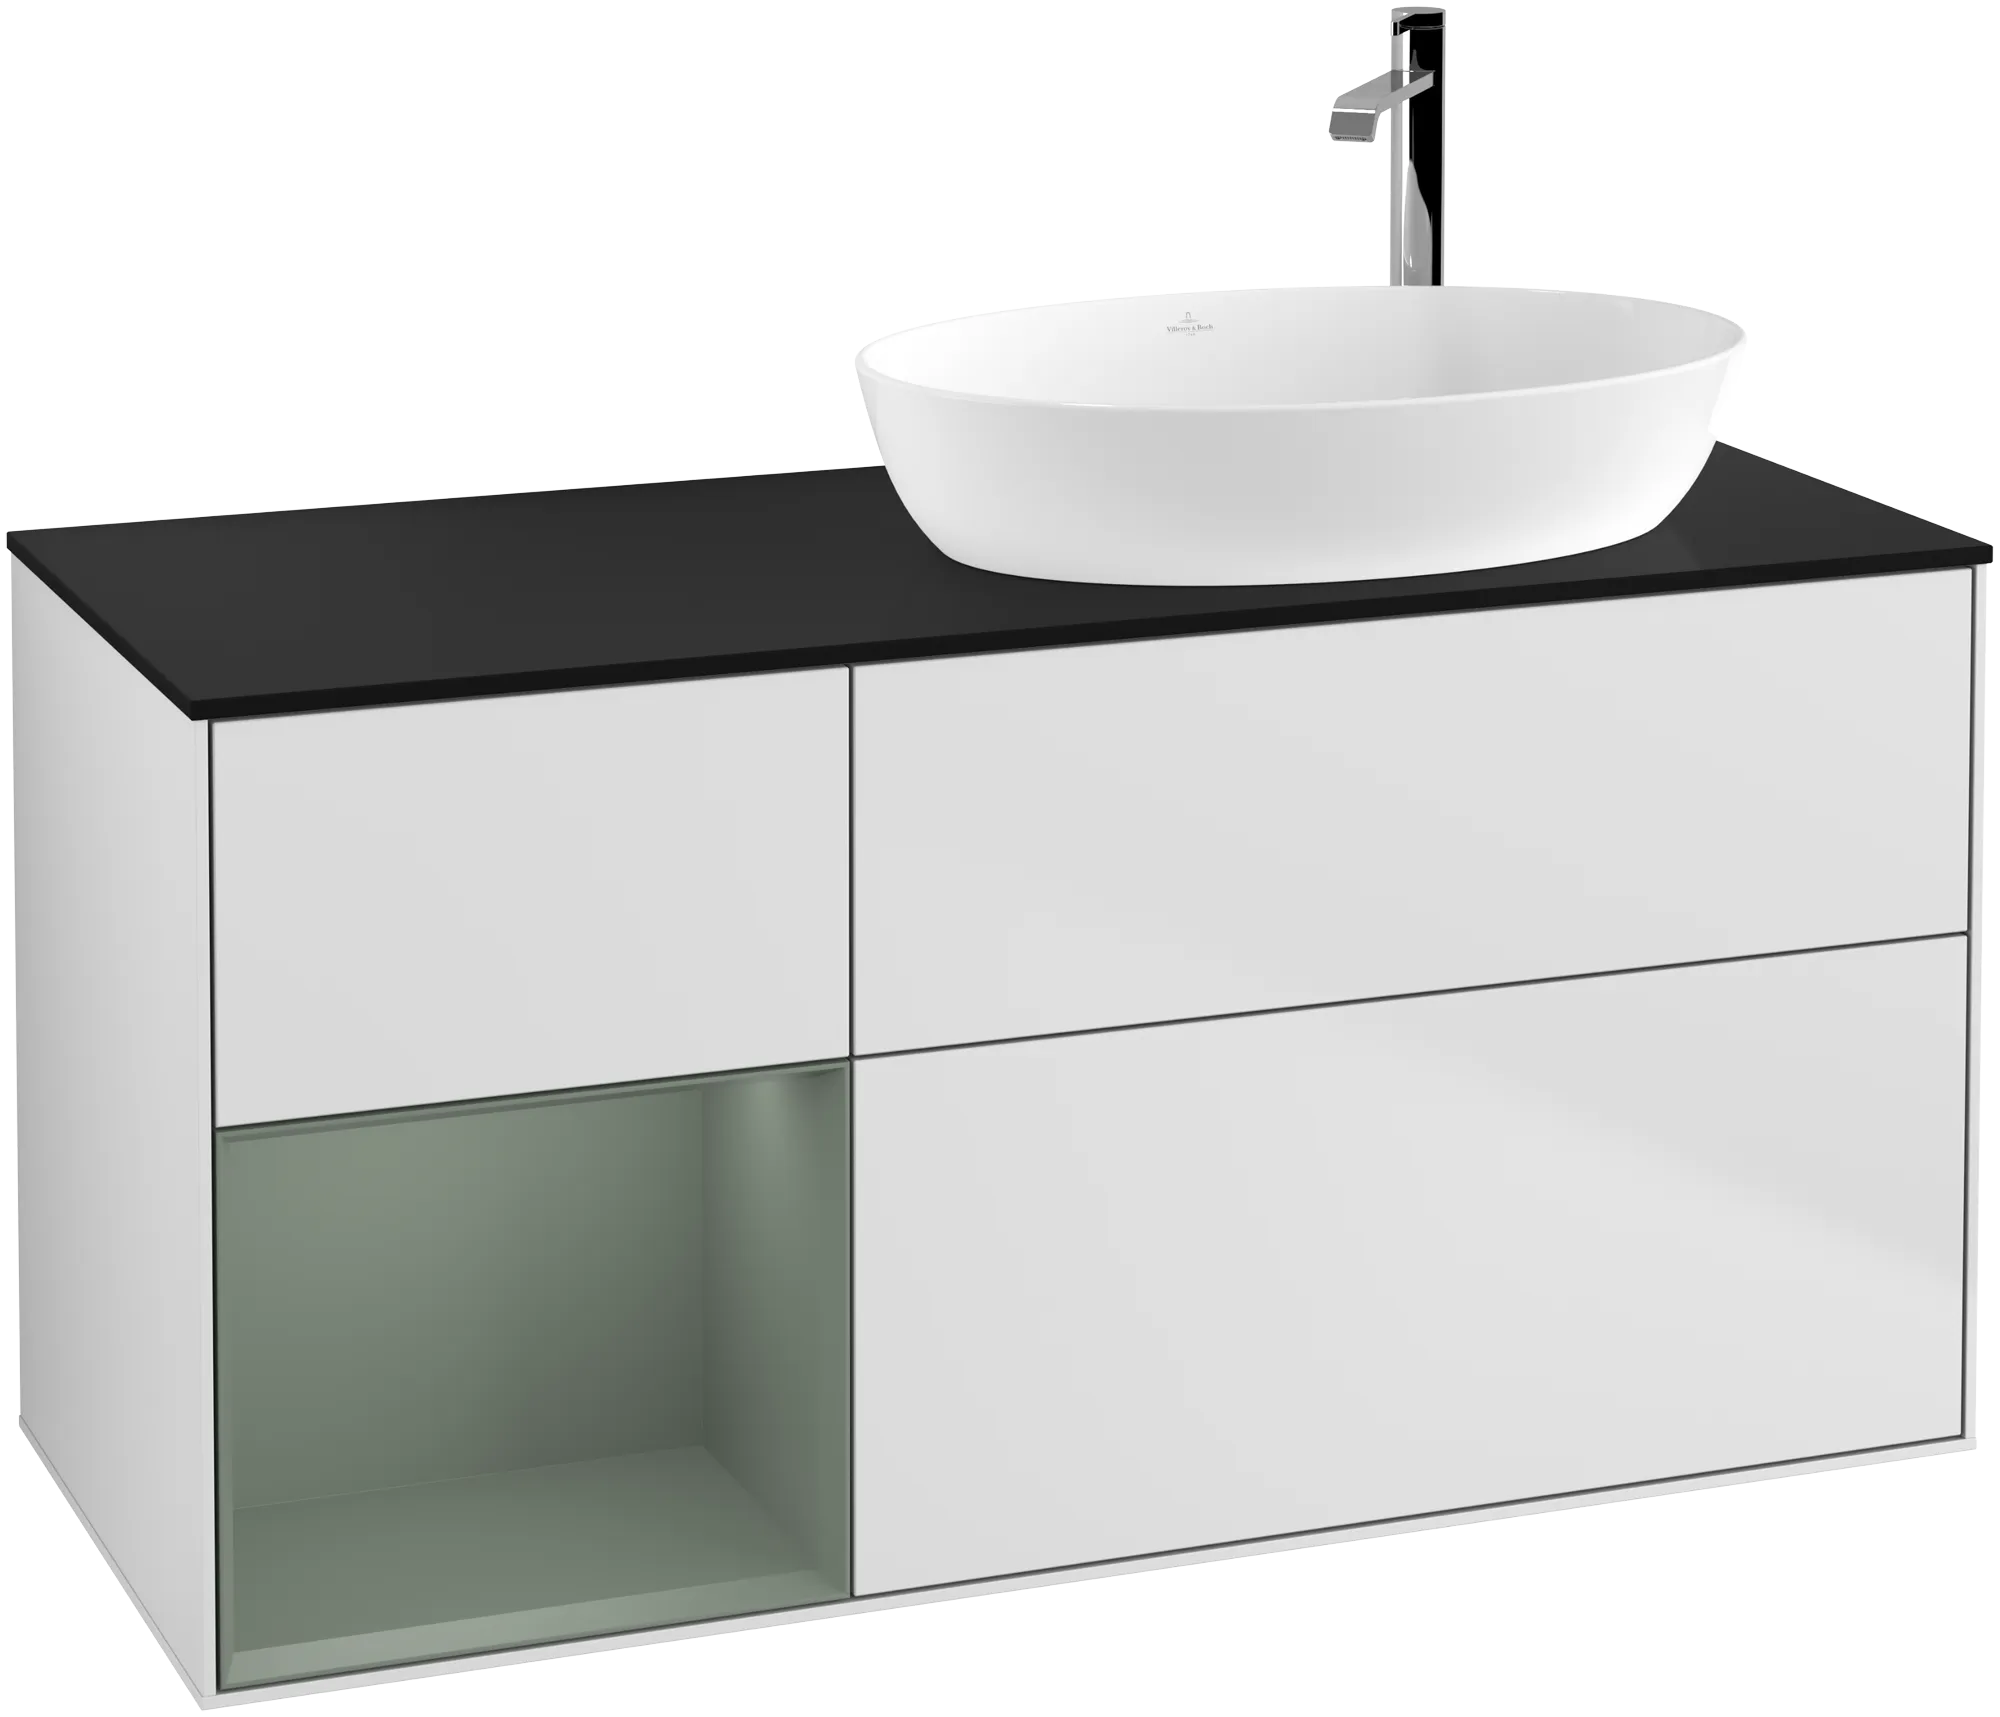 VILLEROY BOCH Finion Vanity unit, with lighting, 3 pull-out compartments, 1200 x 603 x 501 mm, White Matt Lacquer / Olive Matt Lacquer / Glass Black Matt #G922GMMT resmi